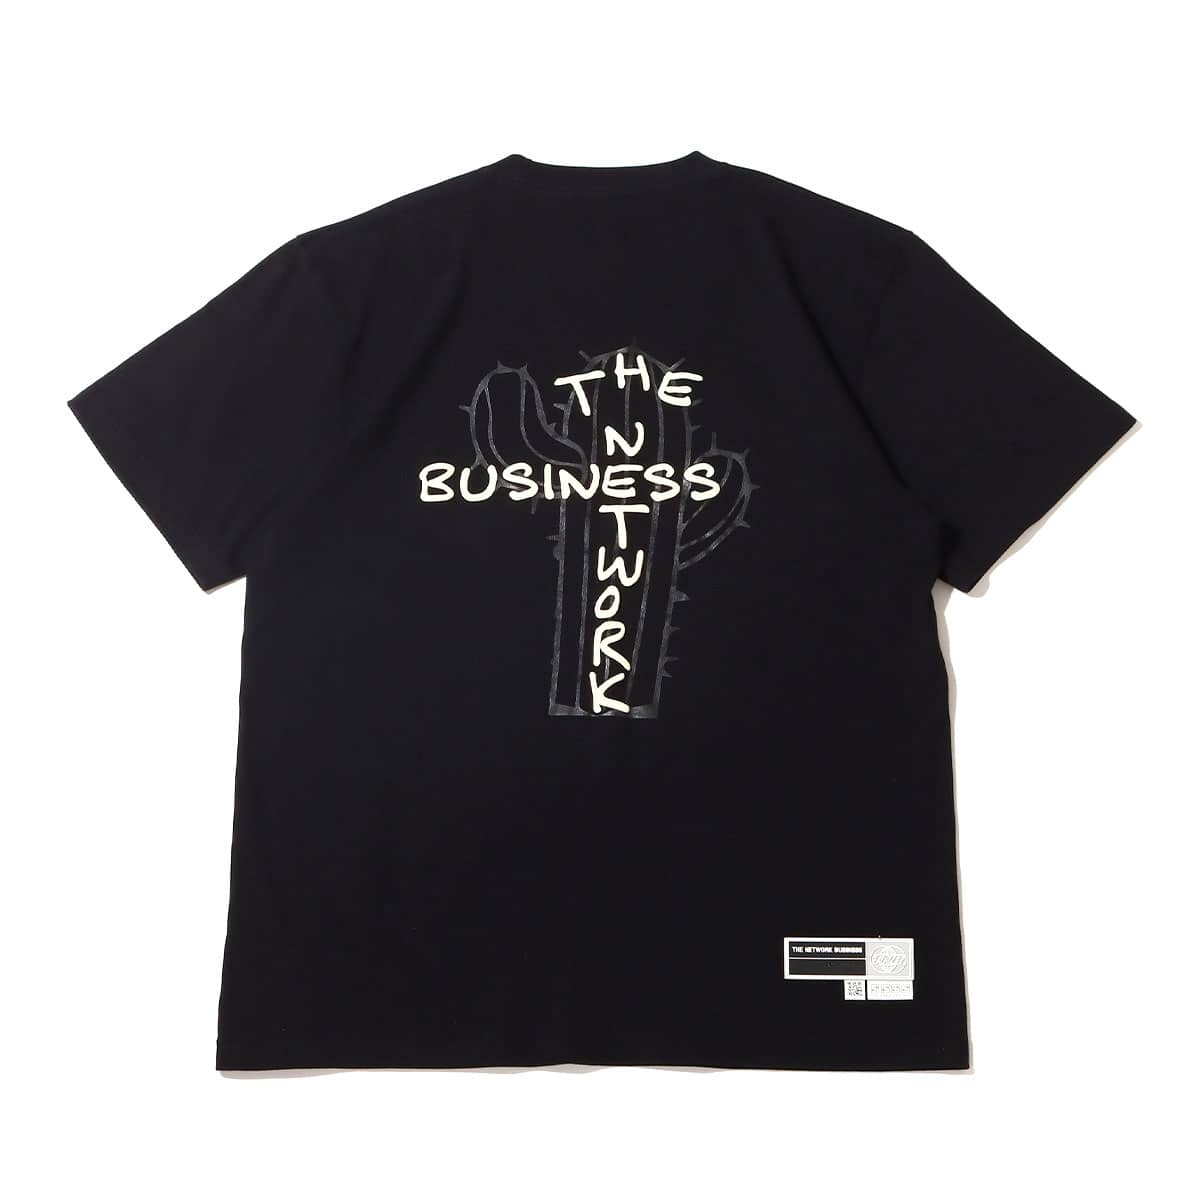 THE NETWORK BUSINESS CLEAR LOGO T.S TEE BLACK 22SU-I